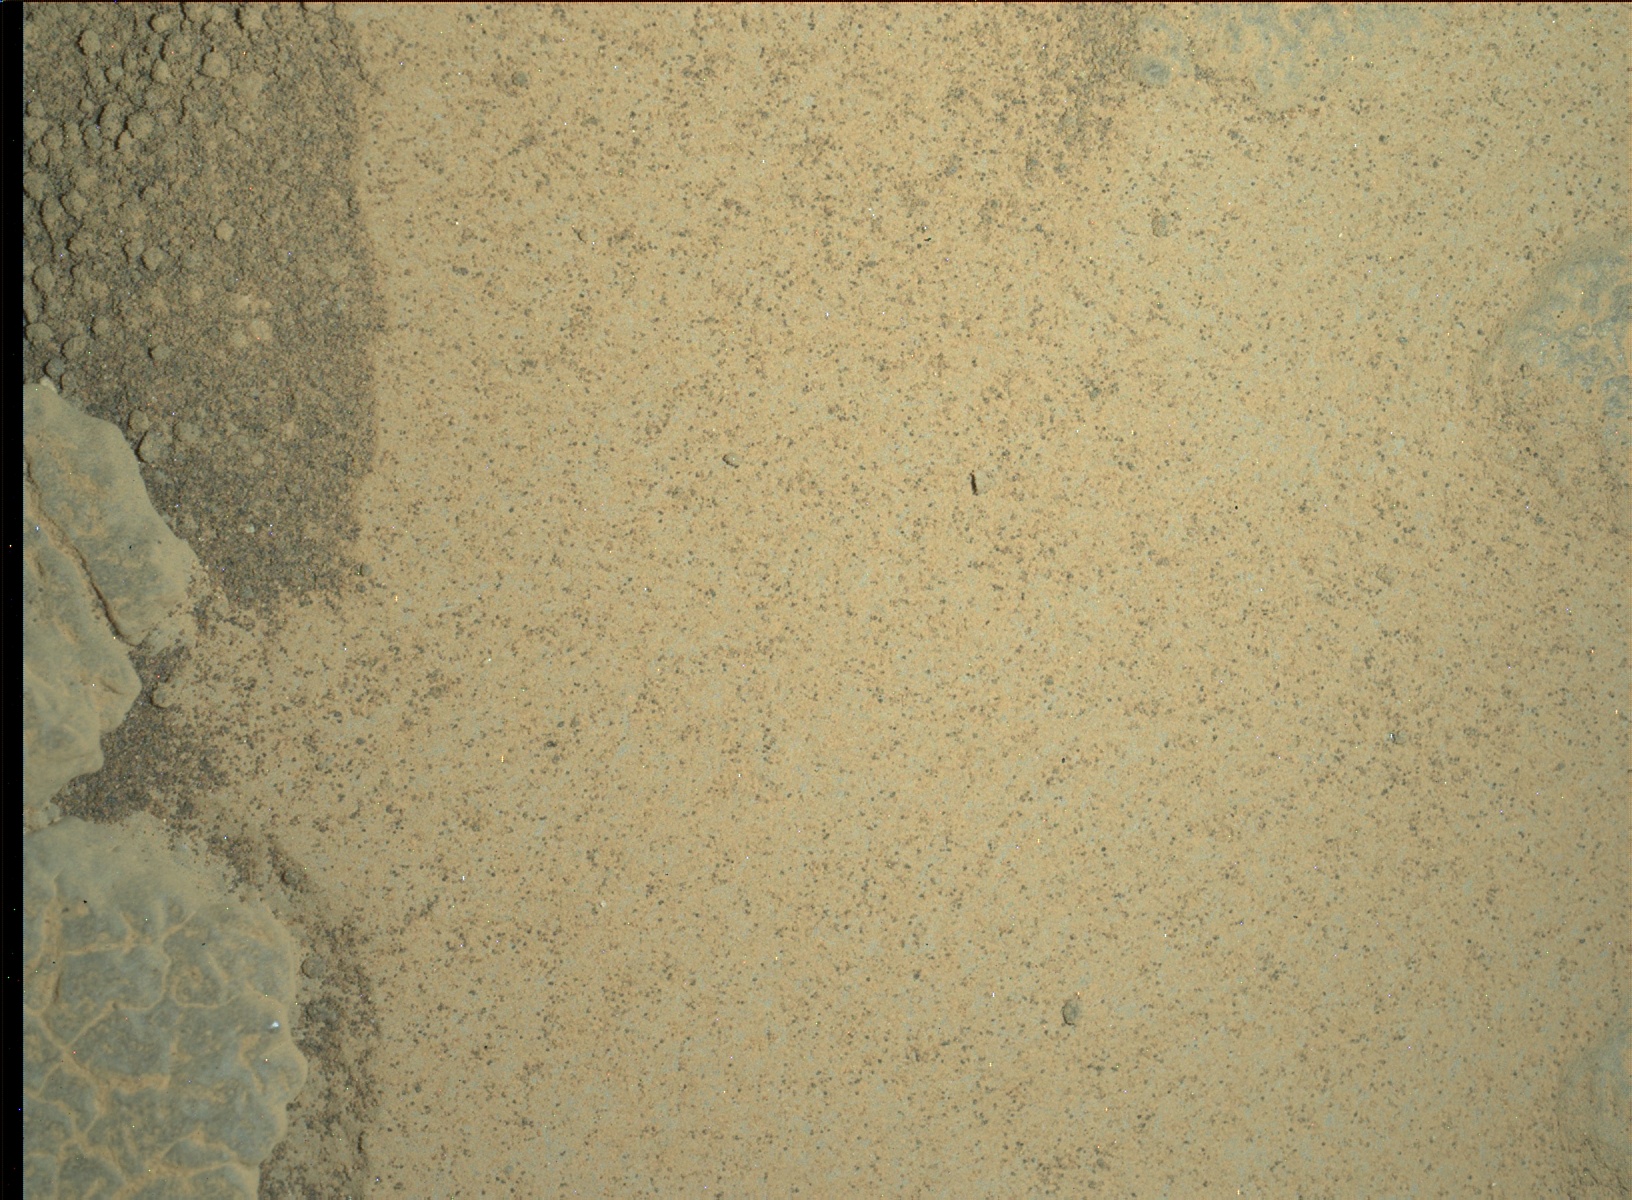 Nasa's Mars rover Curiosity acquired this image using its Mars Hand Lens Imager (MAHLI) on Sol 810